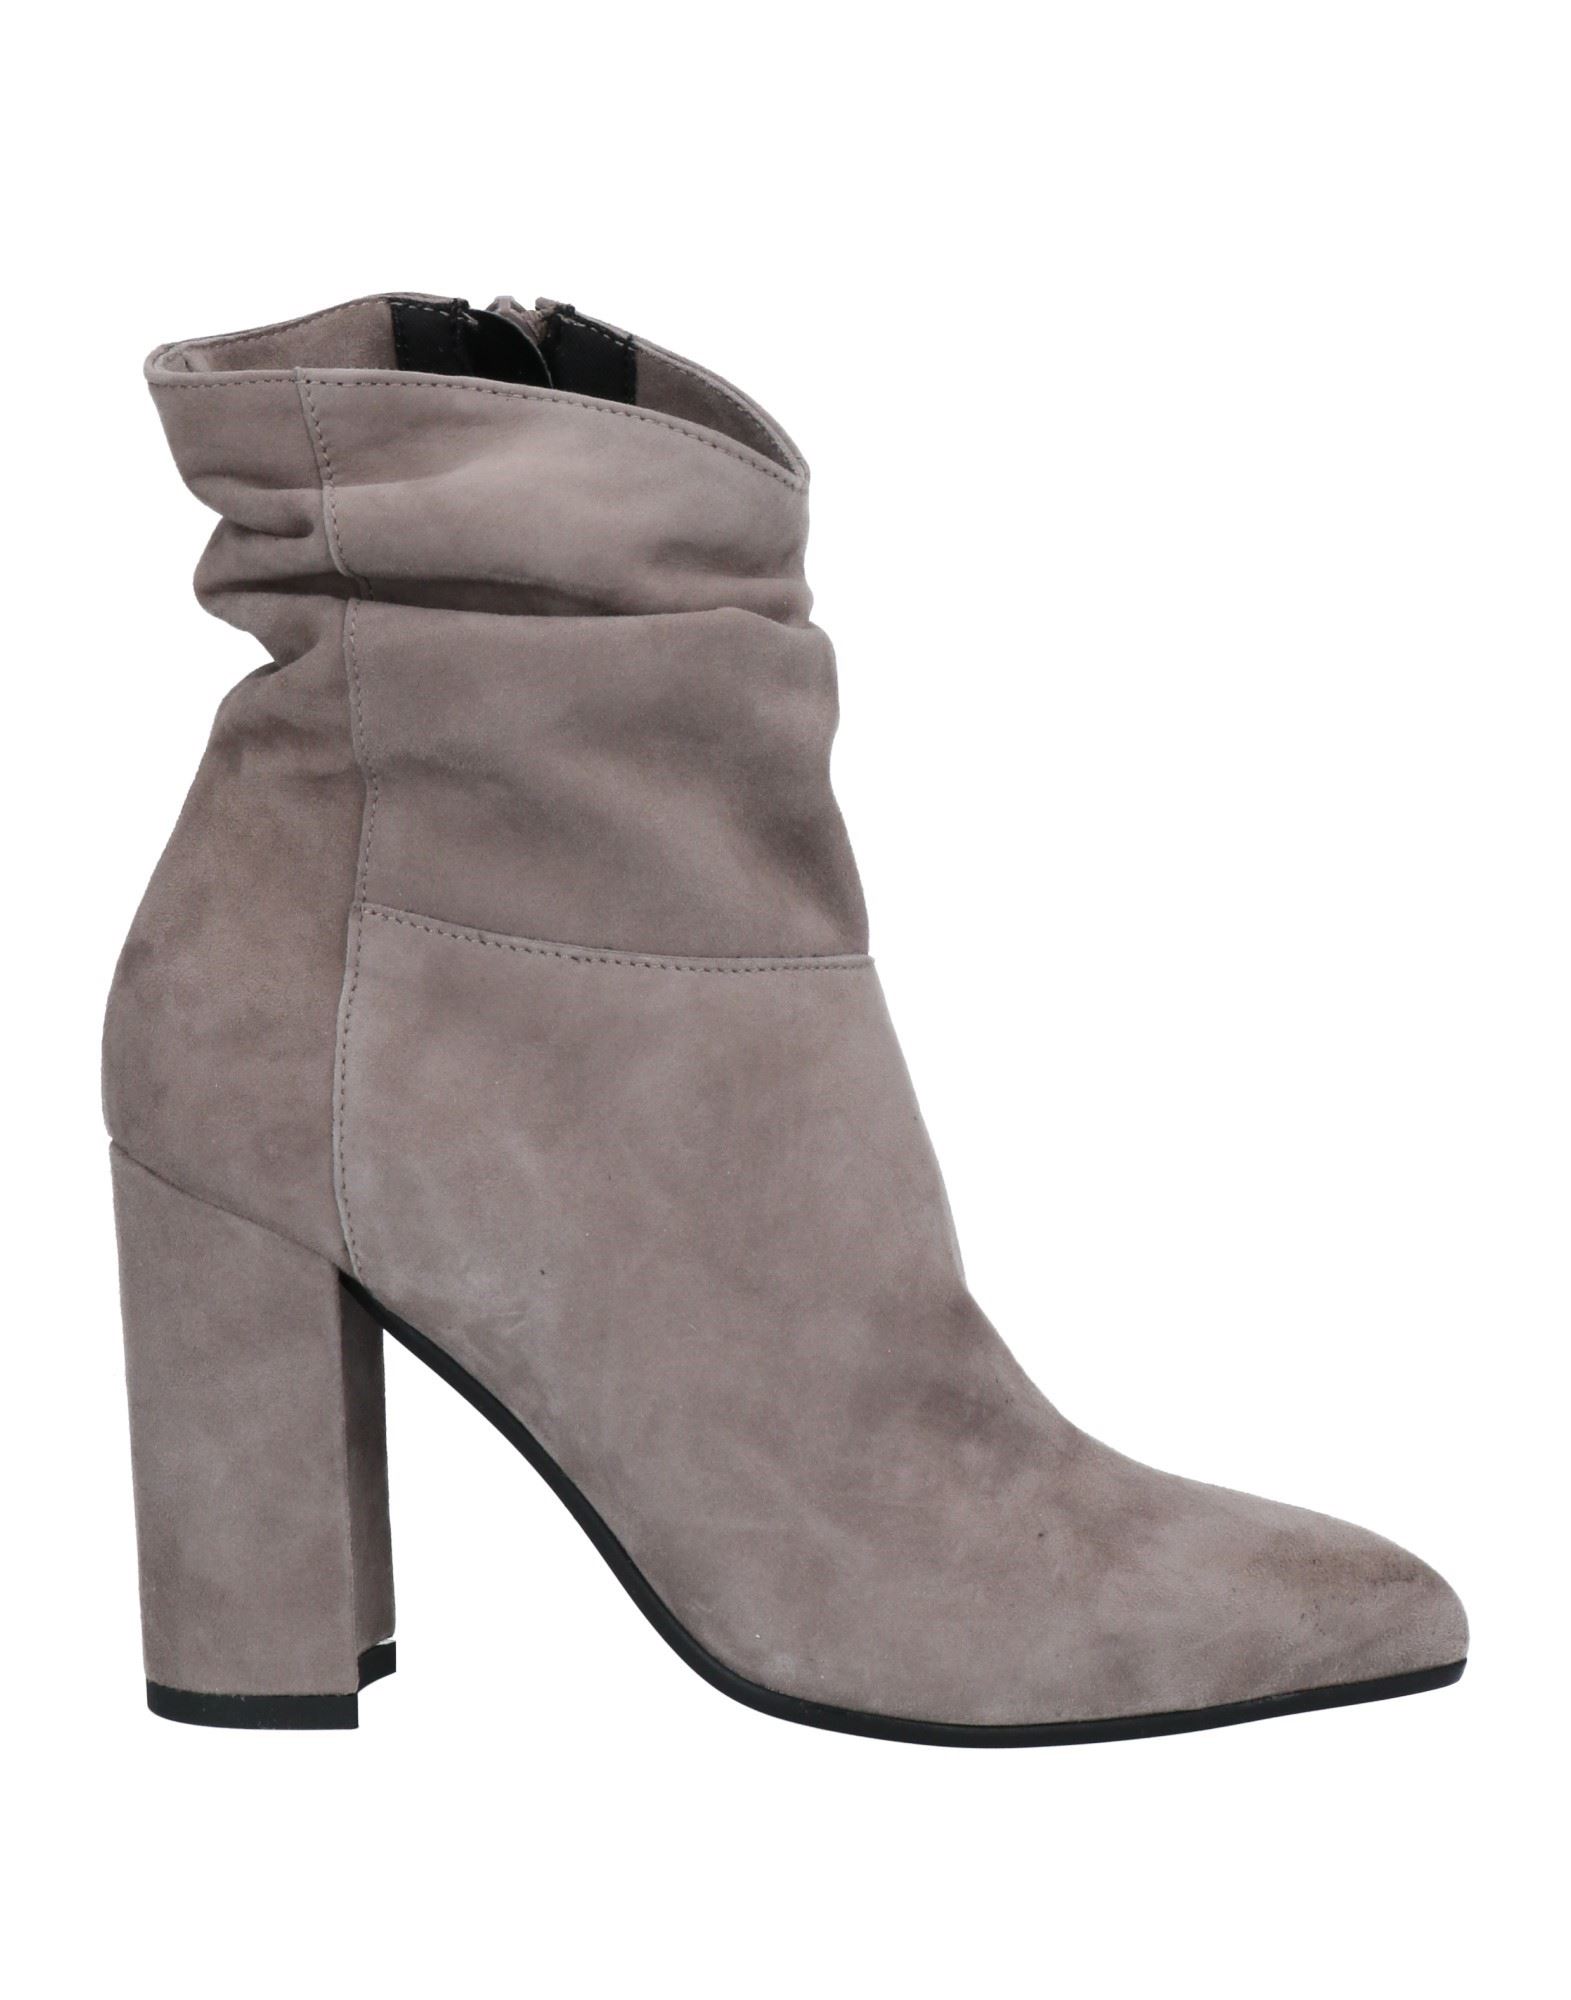 FORMENTINI FORMENTINI WOMAN ANKLE BOOTS GREY SIZE 9 SOFT LEATHER